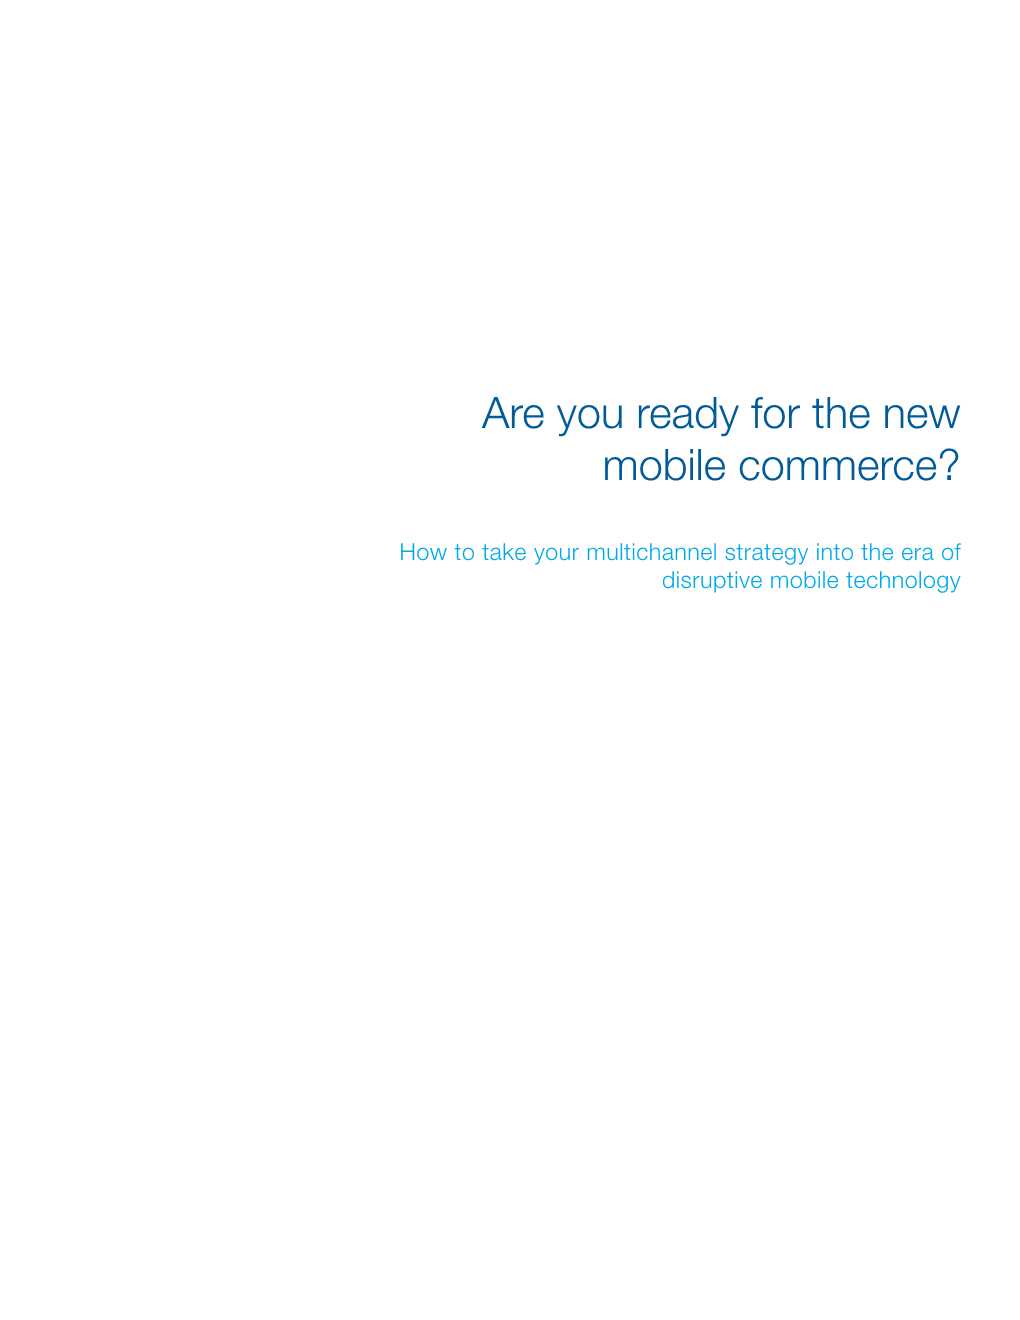 Are You Ready for the New Mobile Commerce?